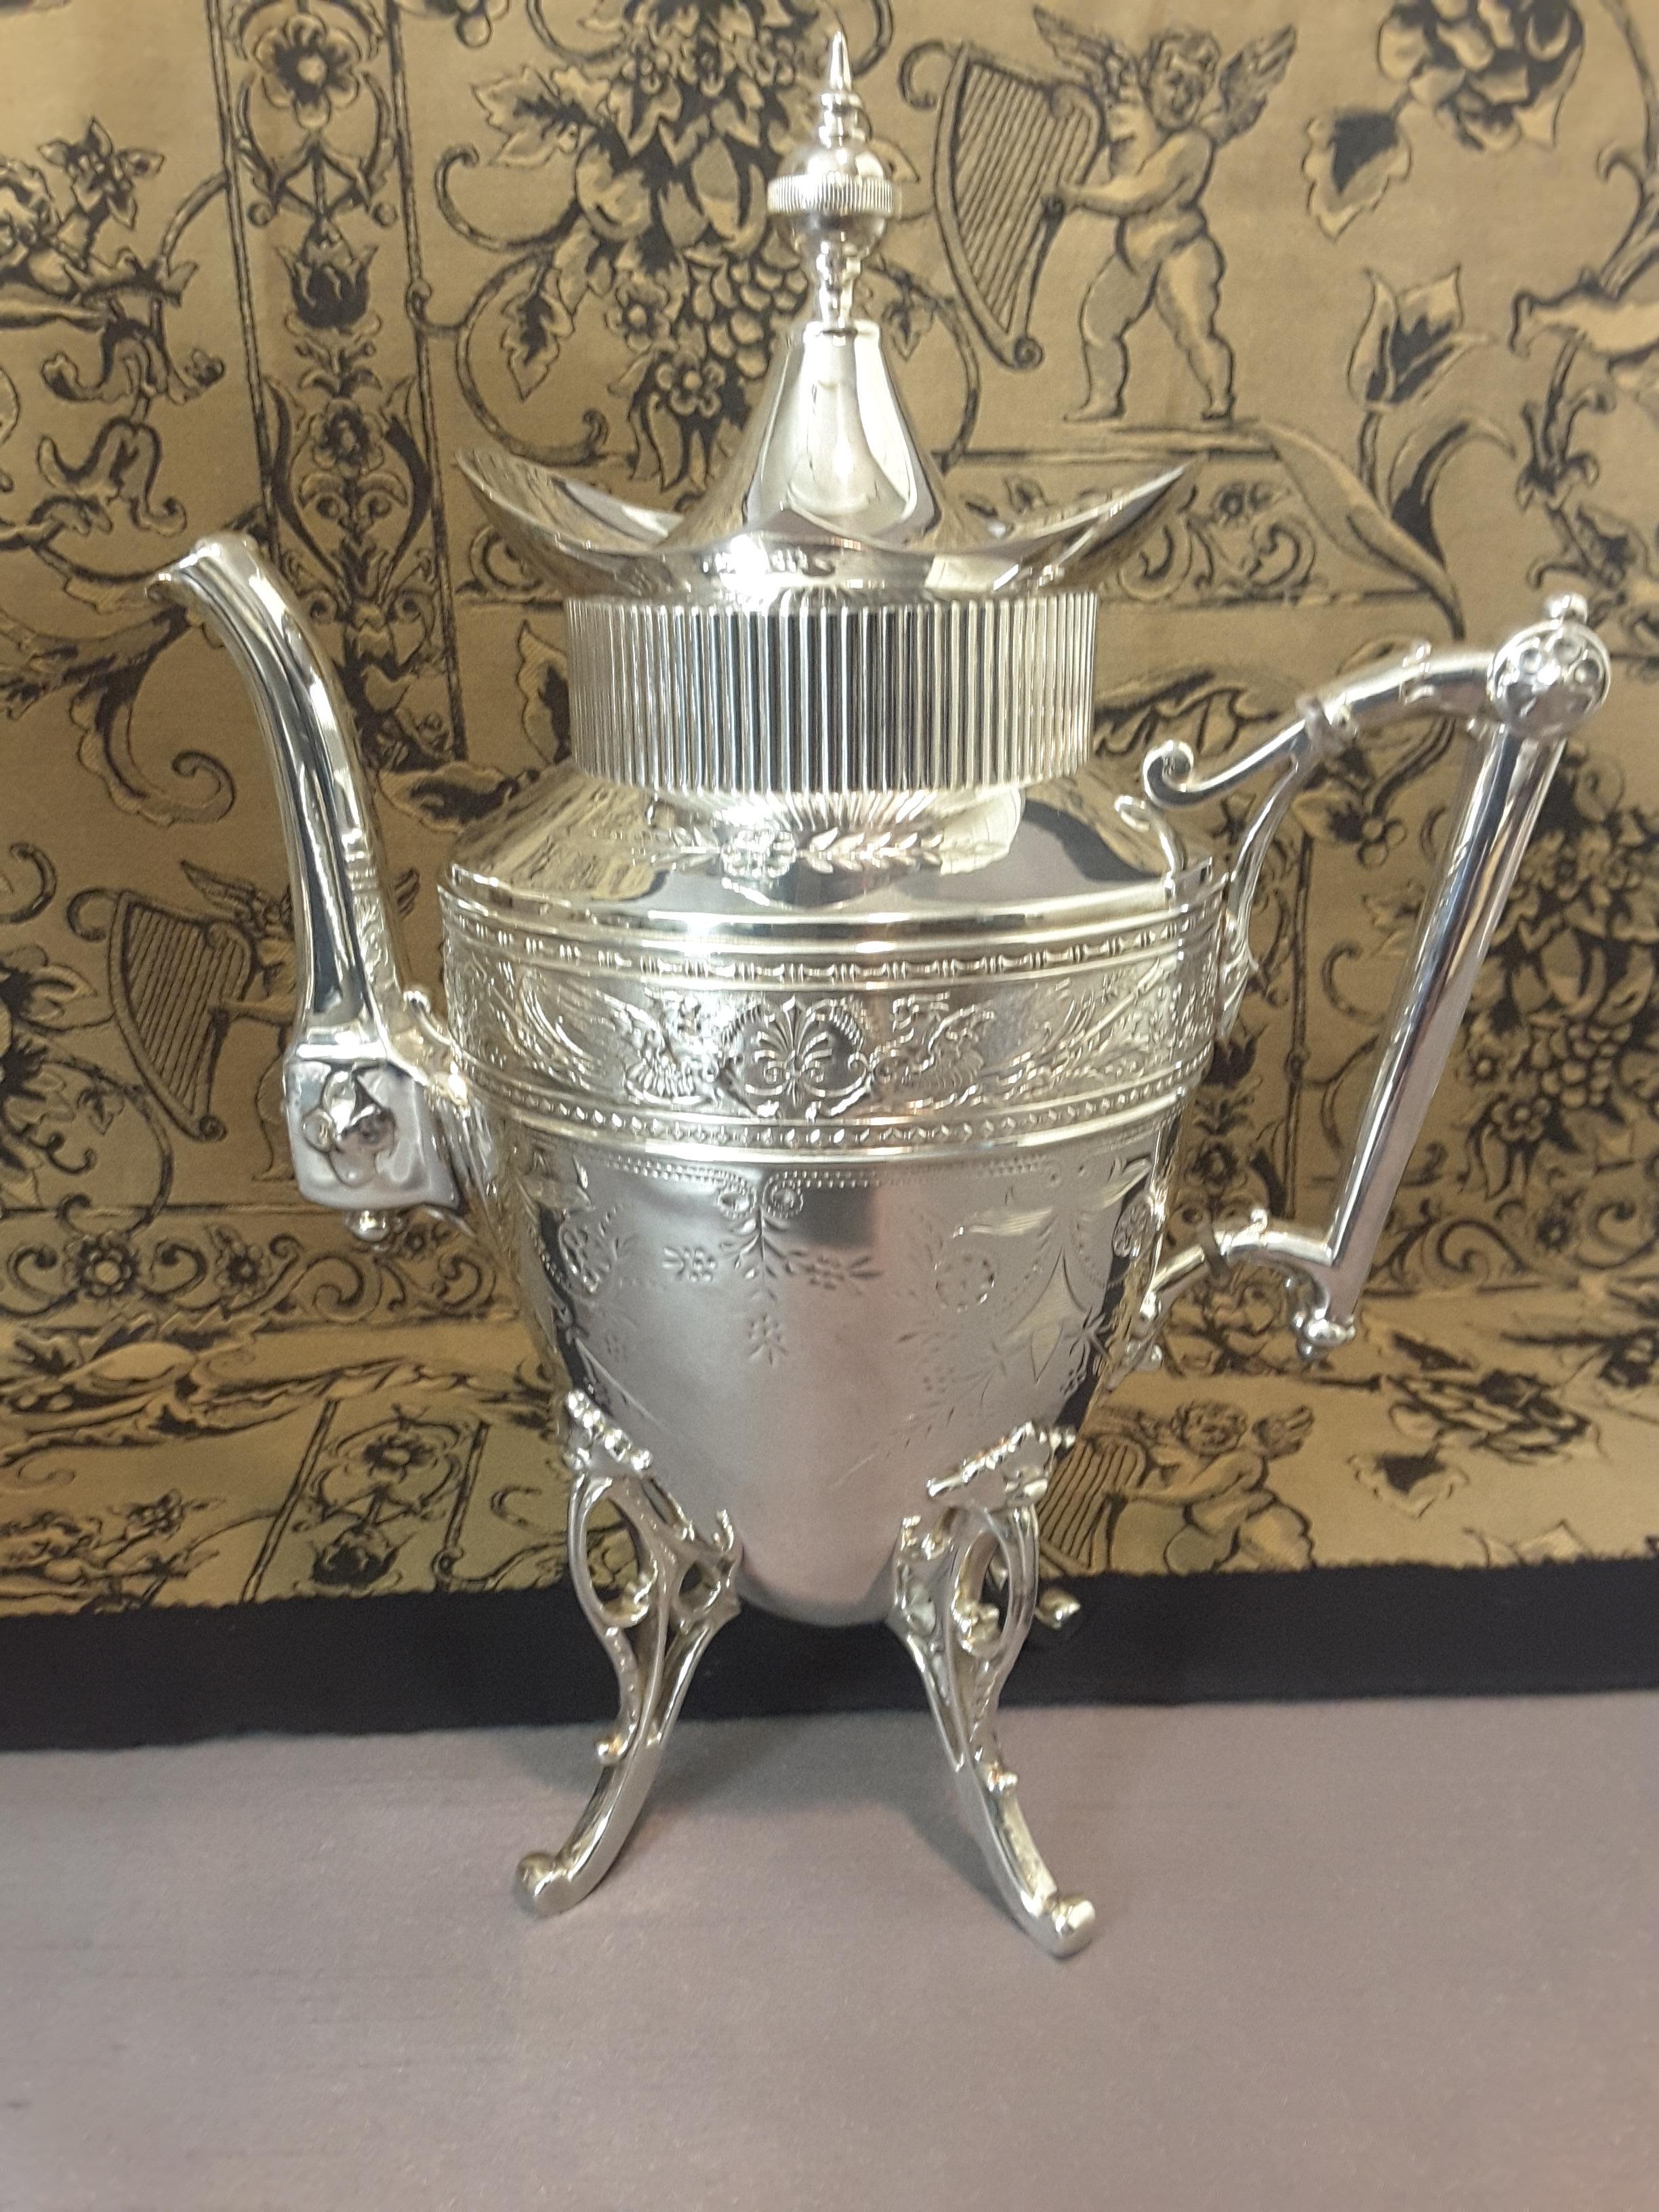 Silver Plate Exquisite Aesthetic Movement Silverplated Tea Service by Simpson, Hall & Miller For Sale